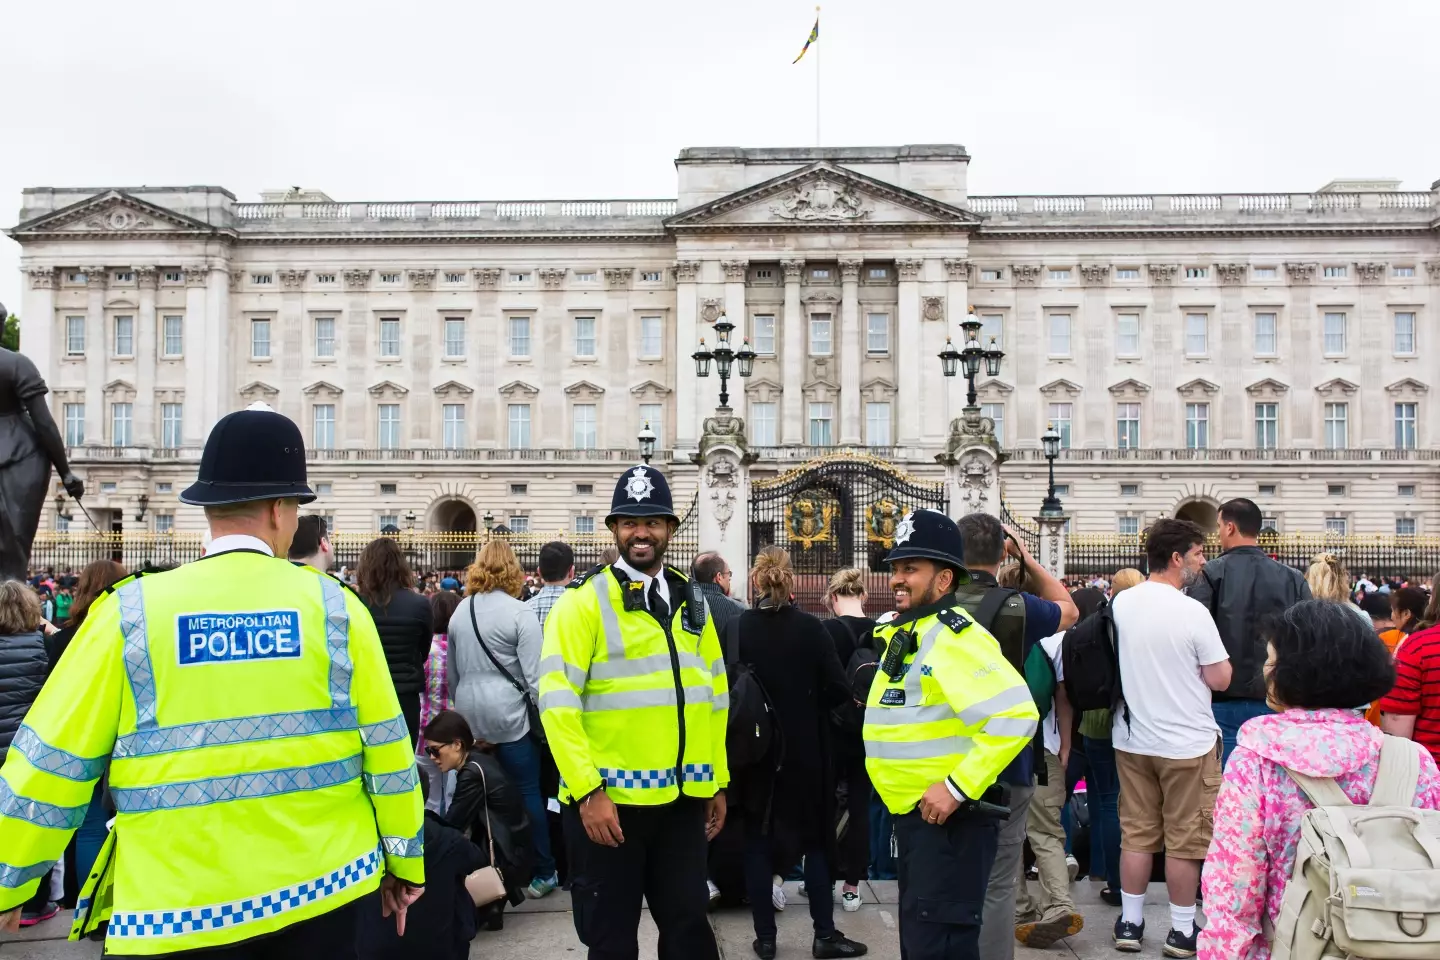 The police force will have an 'extremely low tolerance' for anyone causing disruption to the day's events.